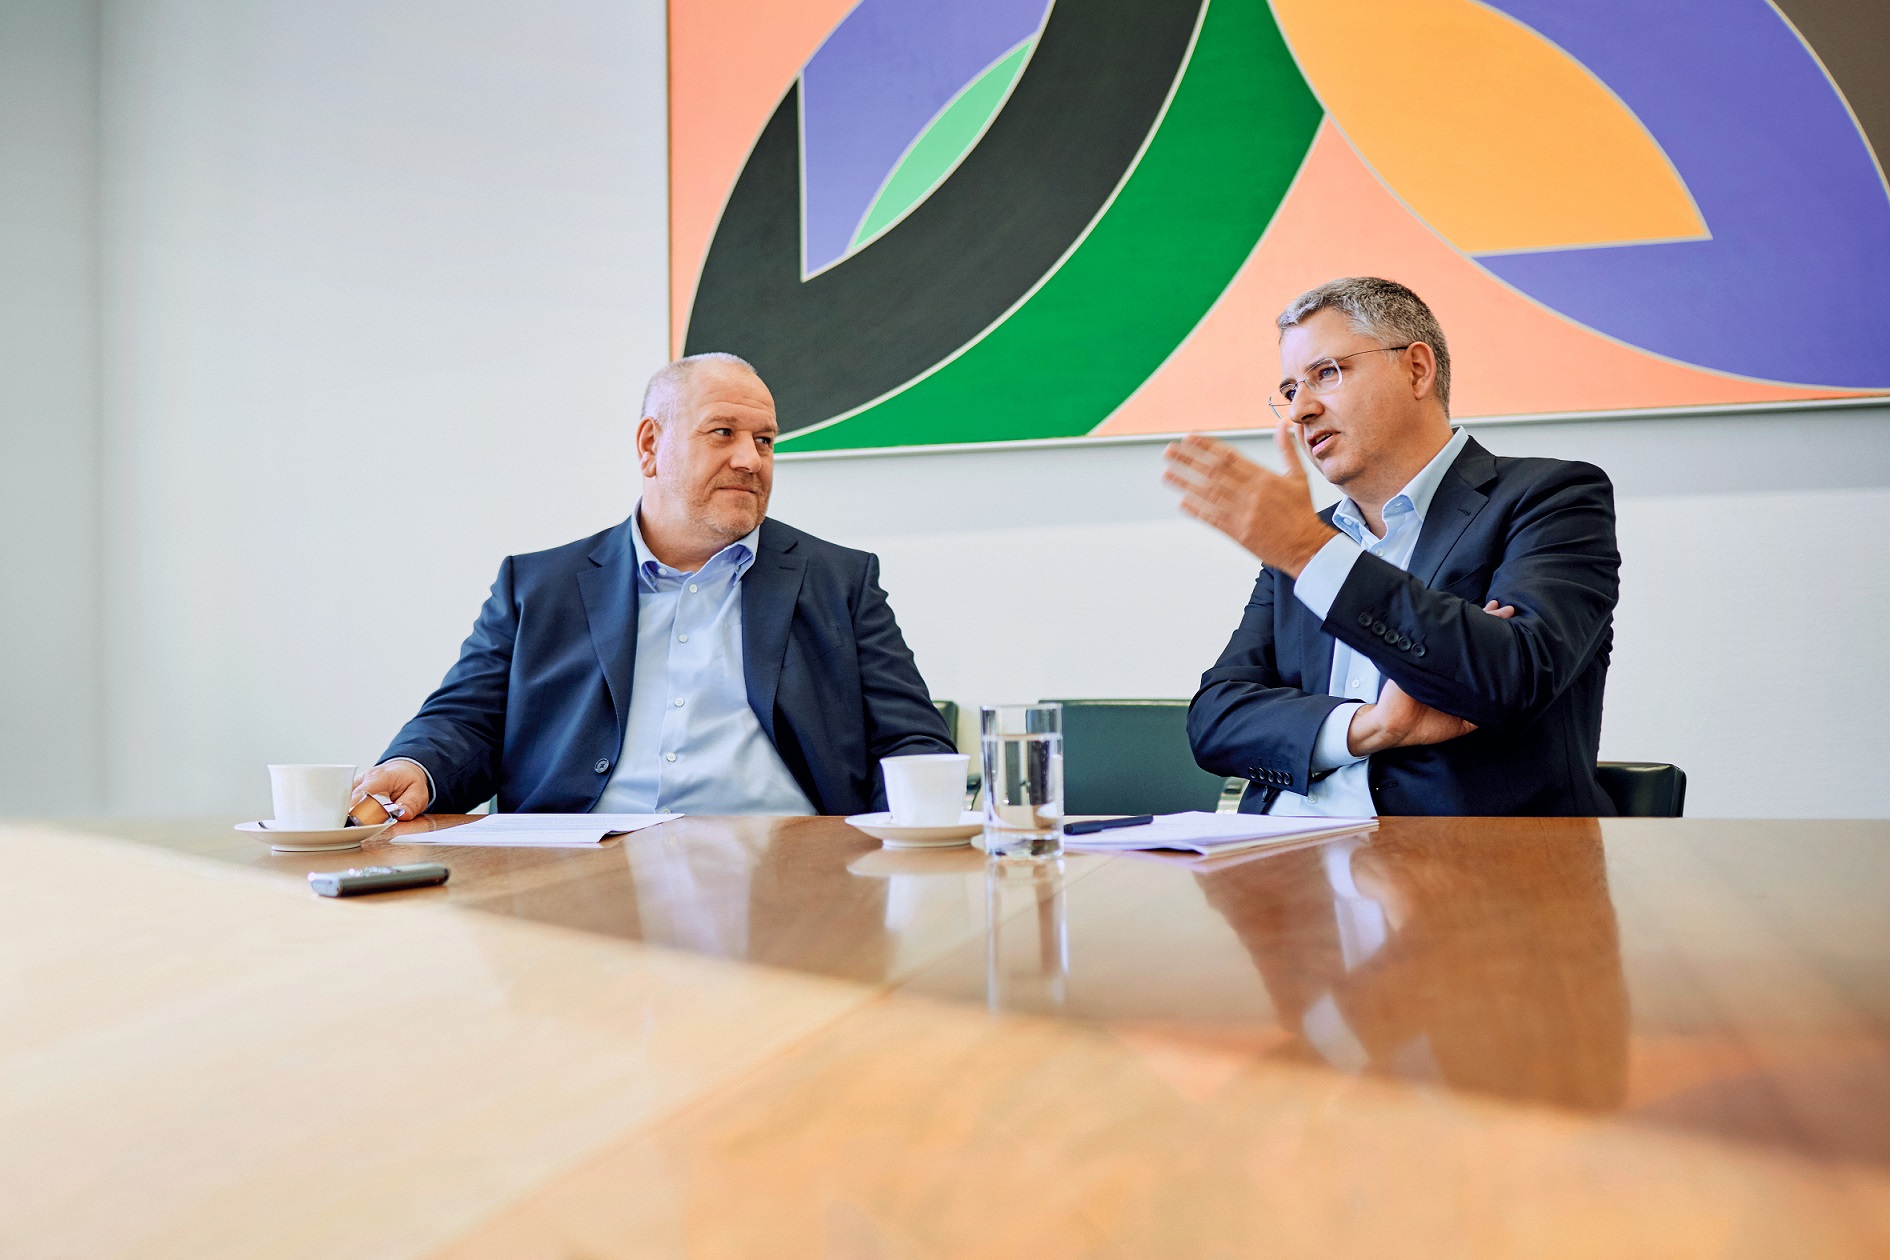 Severin Schwan and Matthias Altendorf sitting next to each other on a table